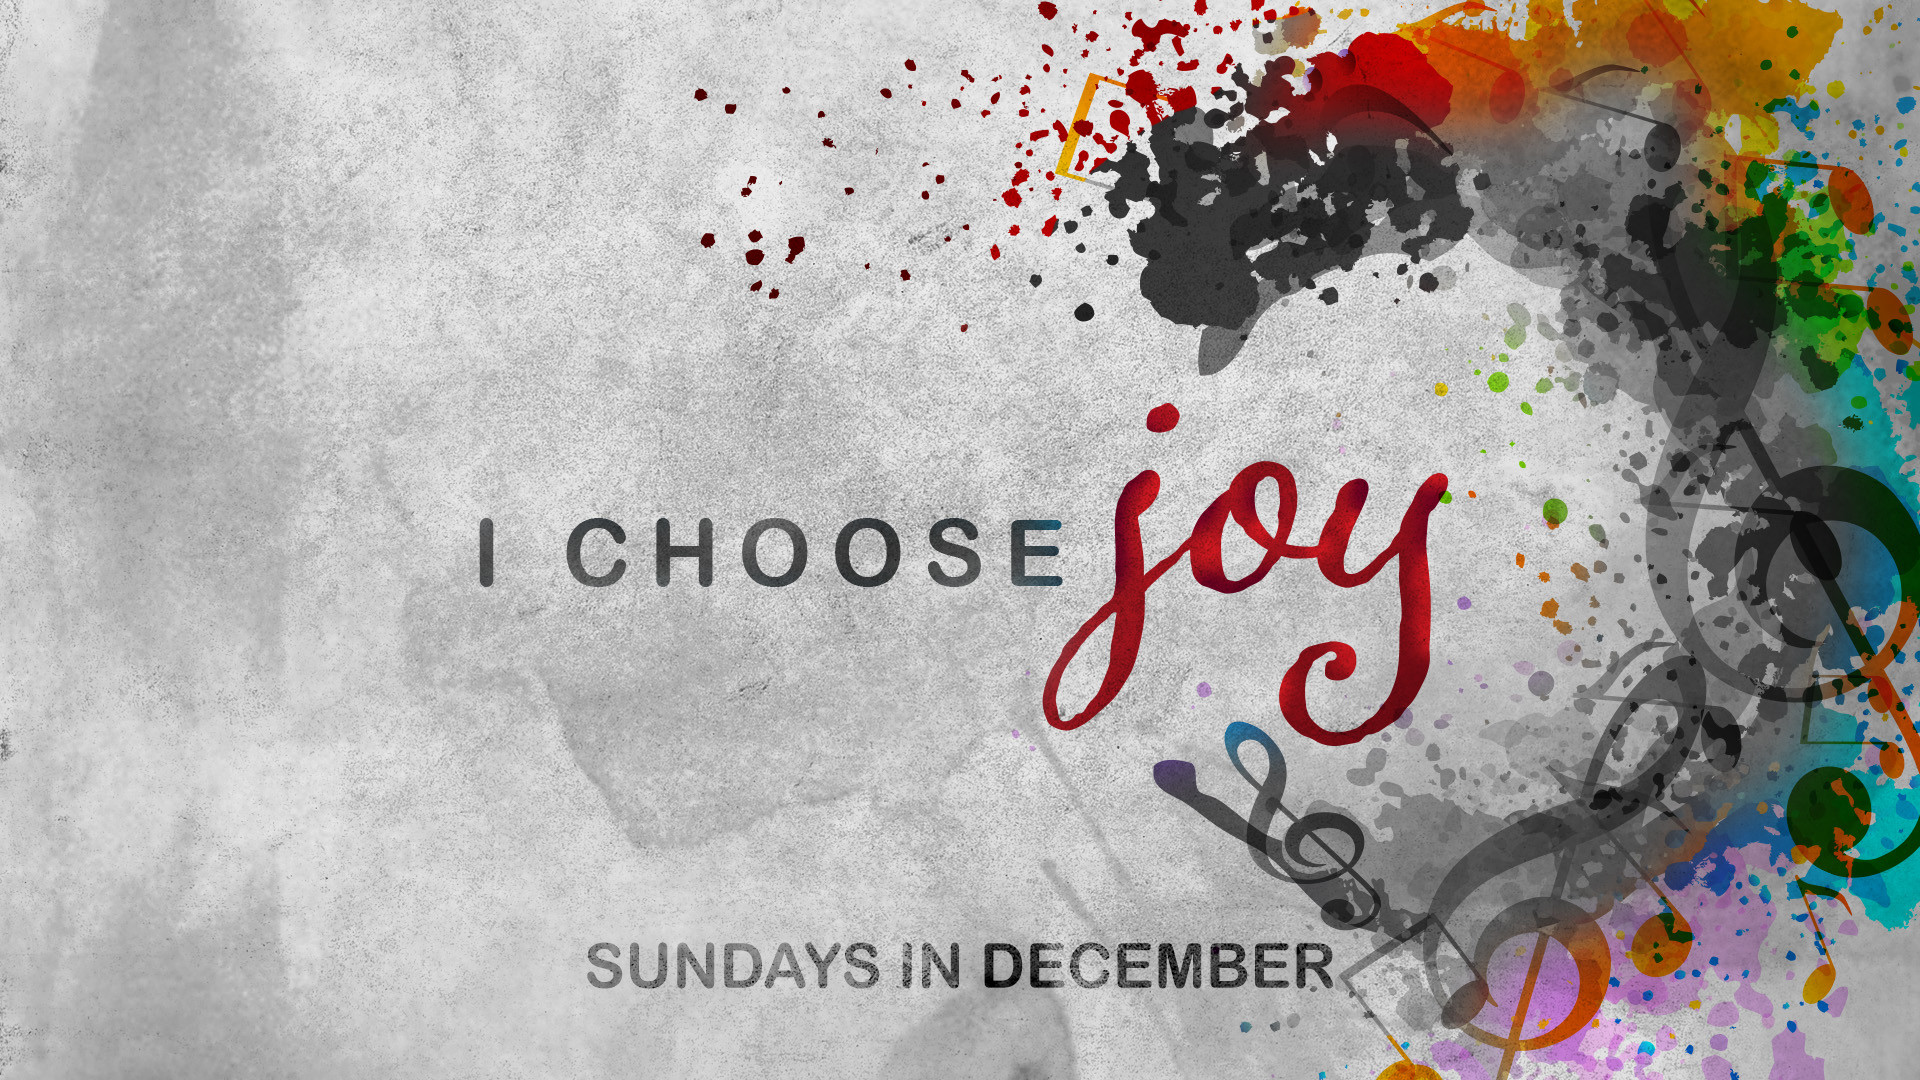 1920x1080 December is going to be an amazing journey together to find JOY right in  the middle of an angry, unhappy world. God made a choice that made it  possible for ...